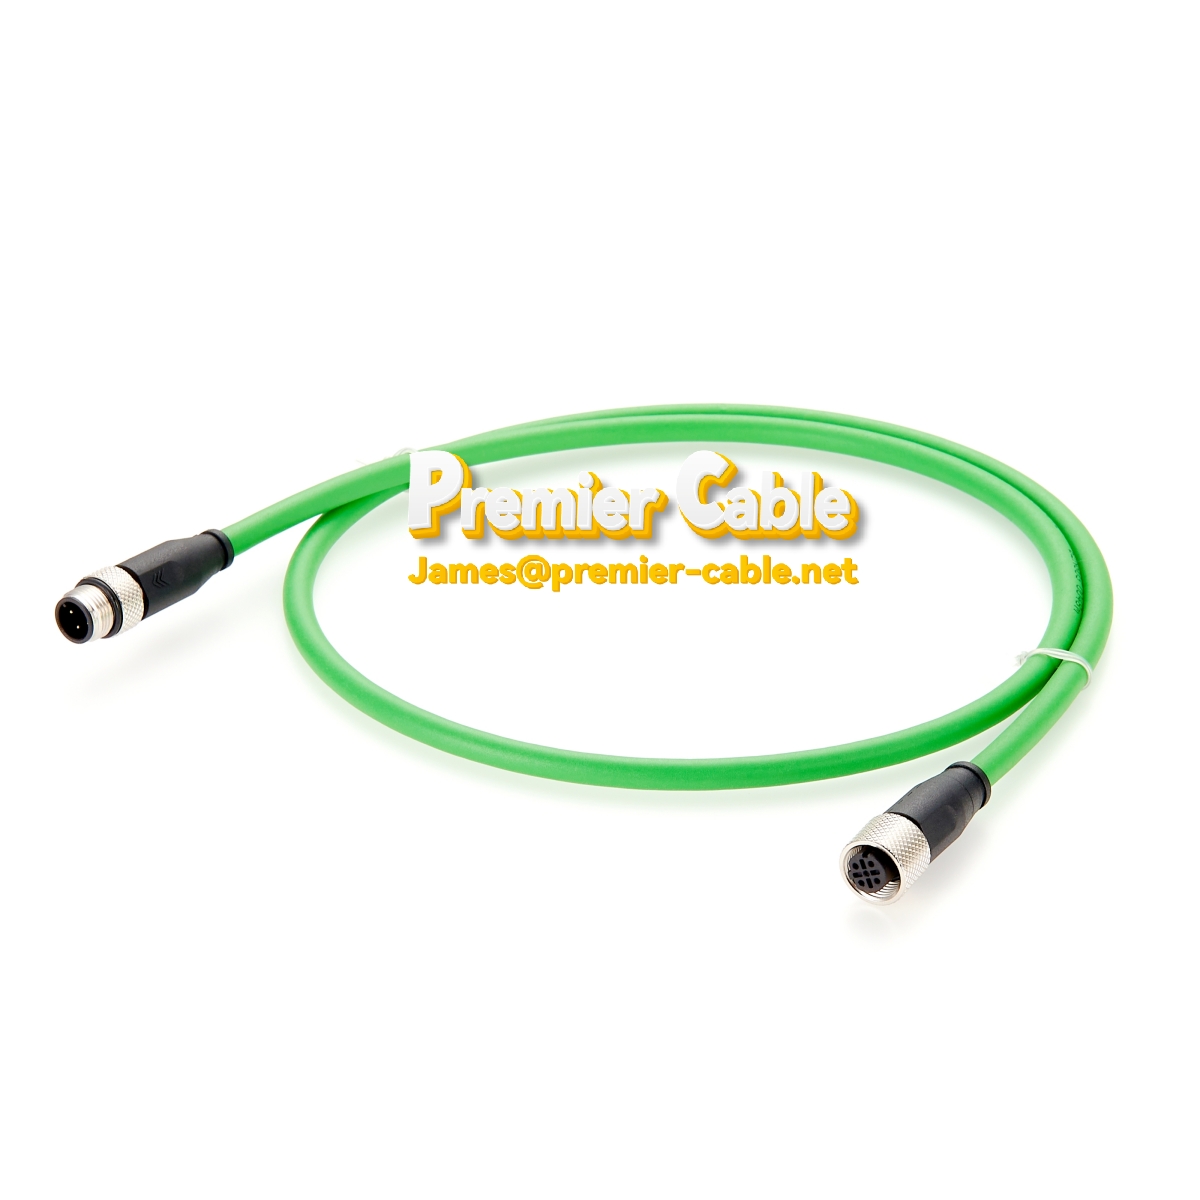 M12 4 Position D-Coded Male to Female Extension Cable 